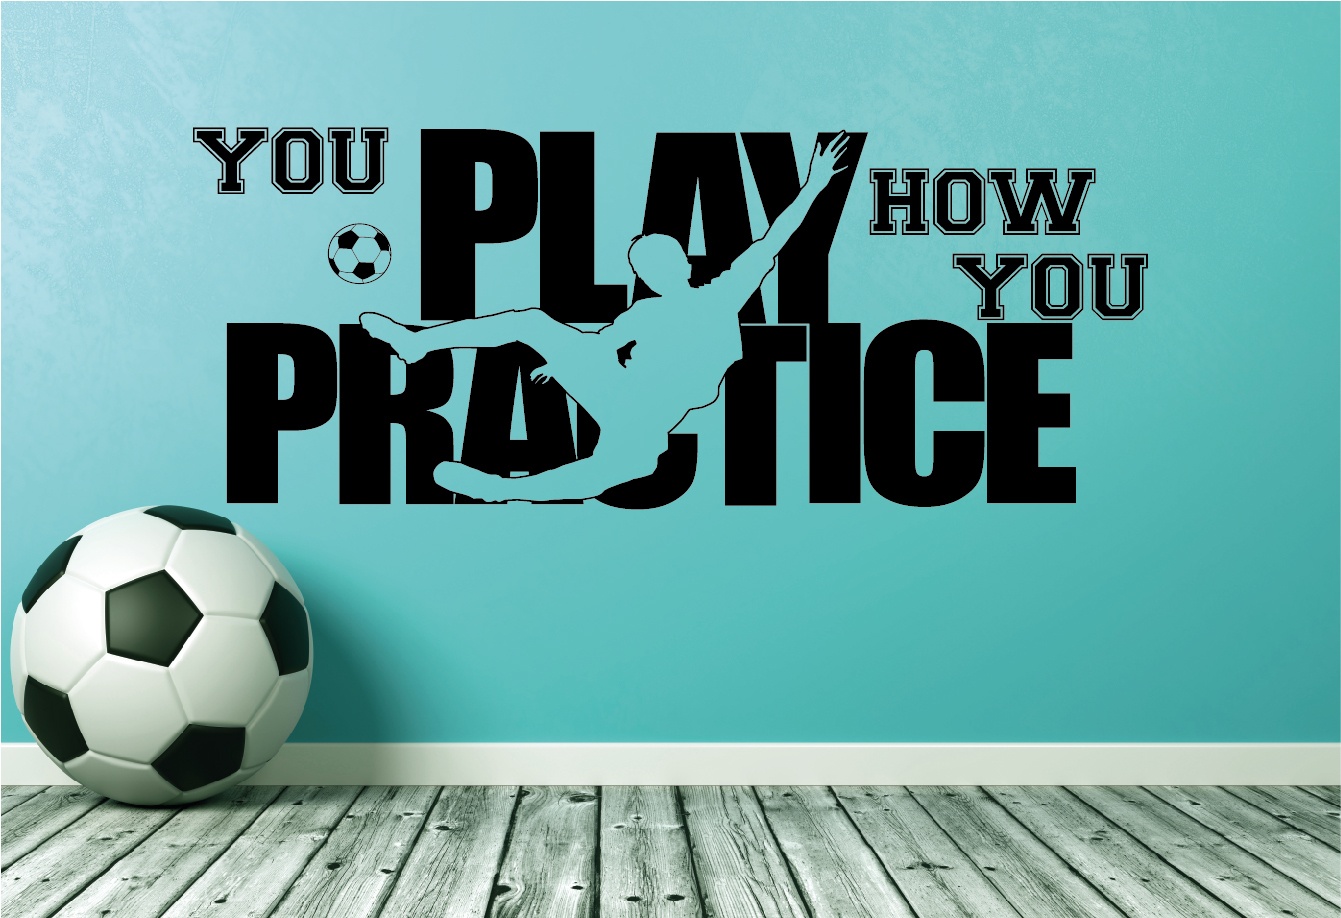 Soccer You play how you practice